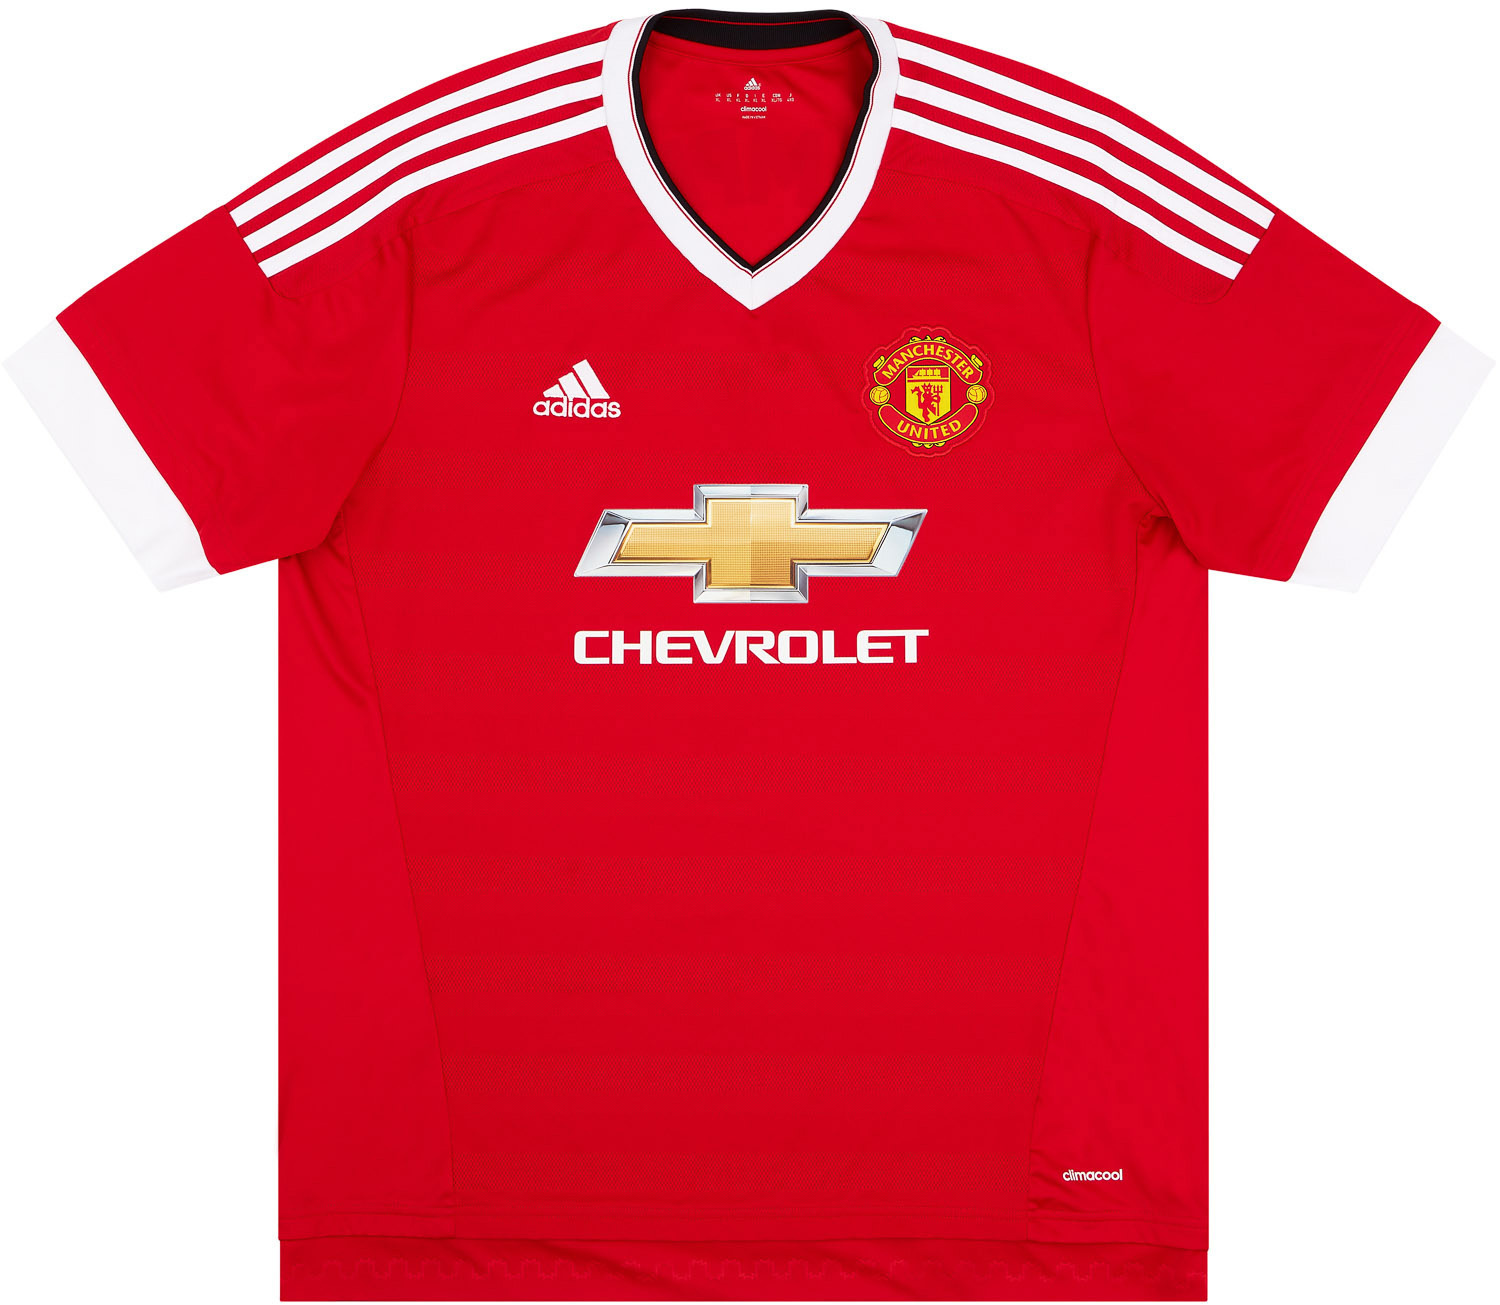 2015-16 Manchester United Home Shirt - 9/10 -